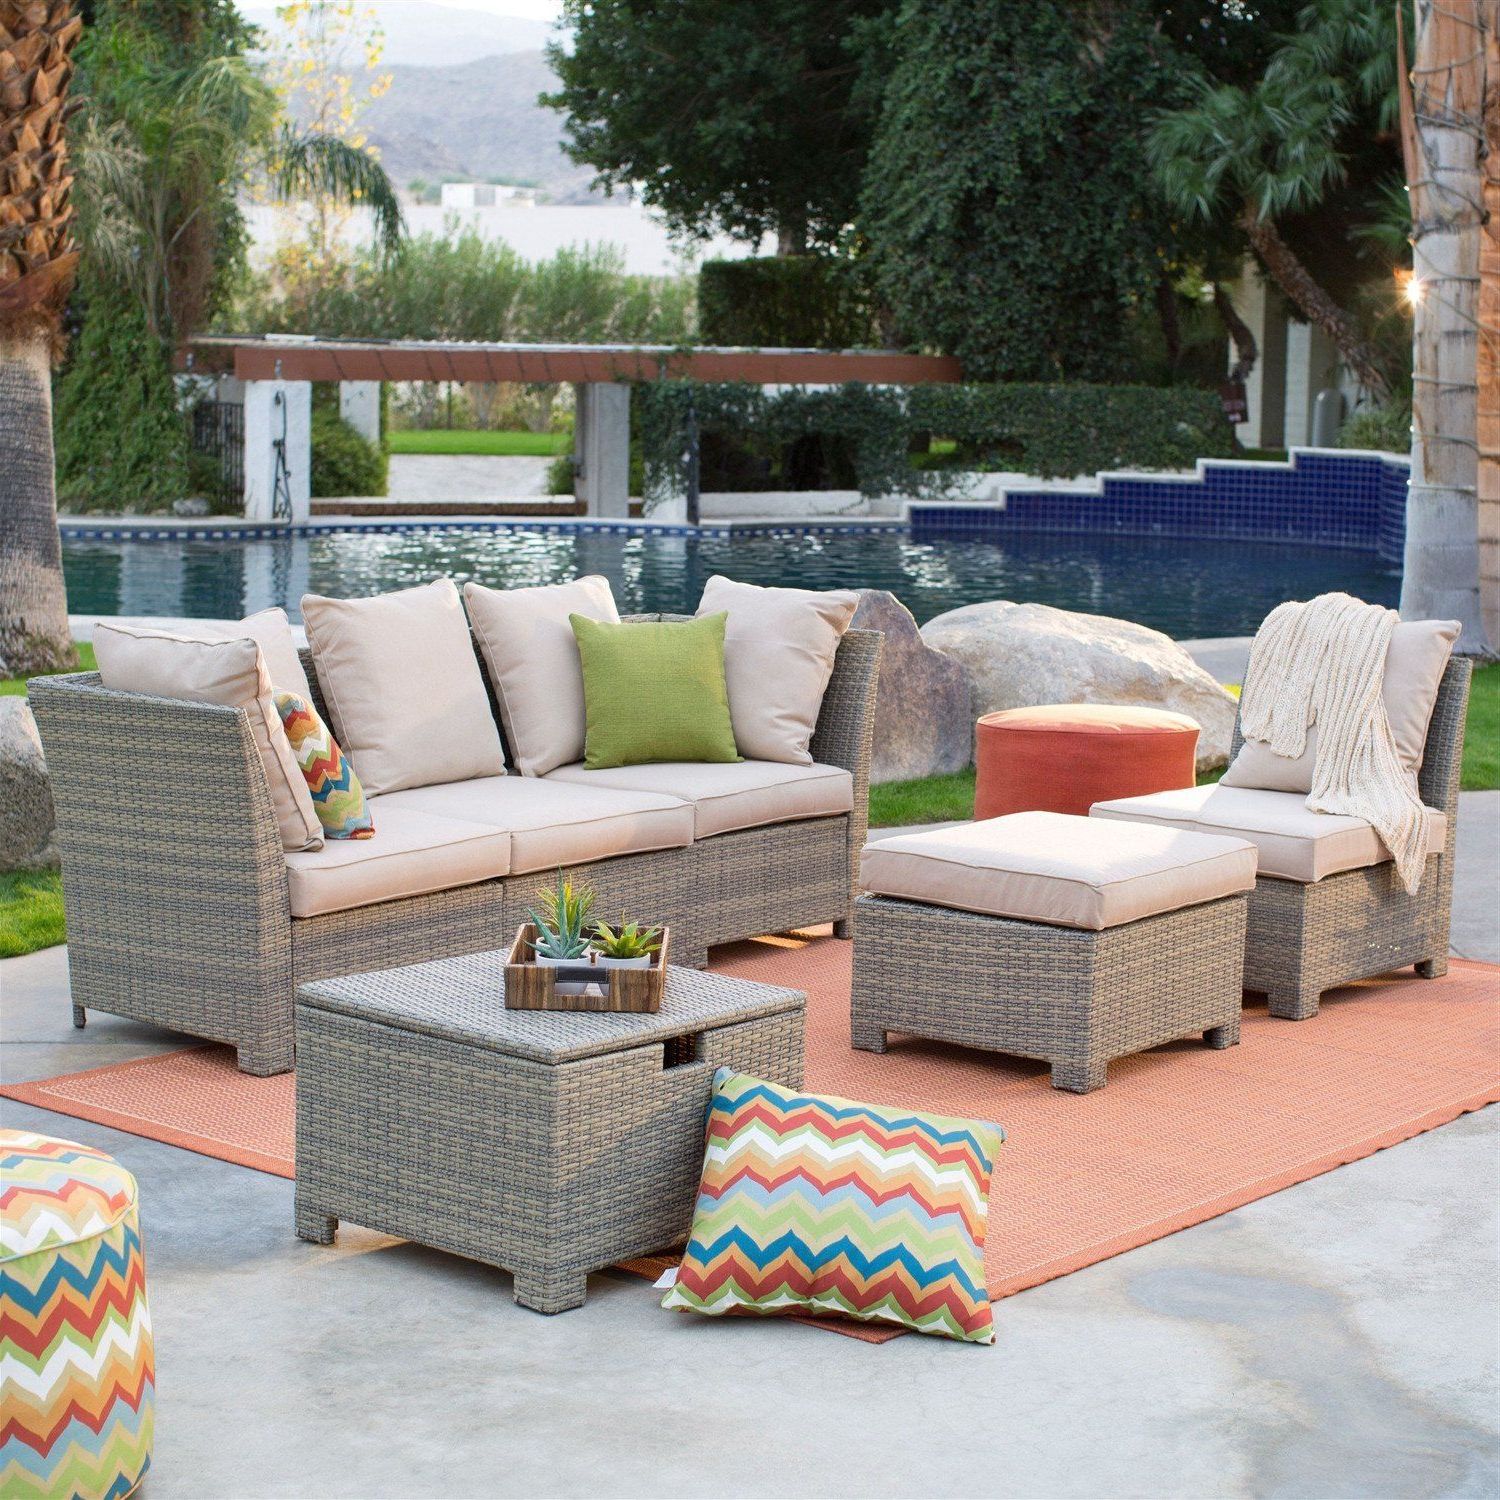 Trendy Natural Woven Modern Outdoor Chairs Sets In Natural Outdoor Wicker Resin Patio Furniture Conversation Set (View 1 of 15)